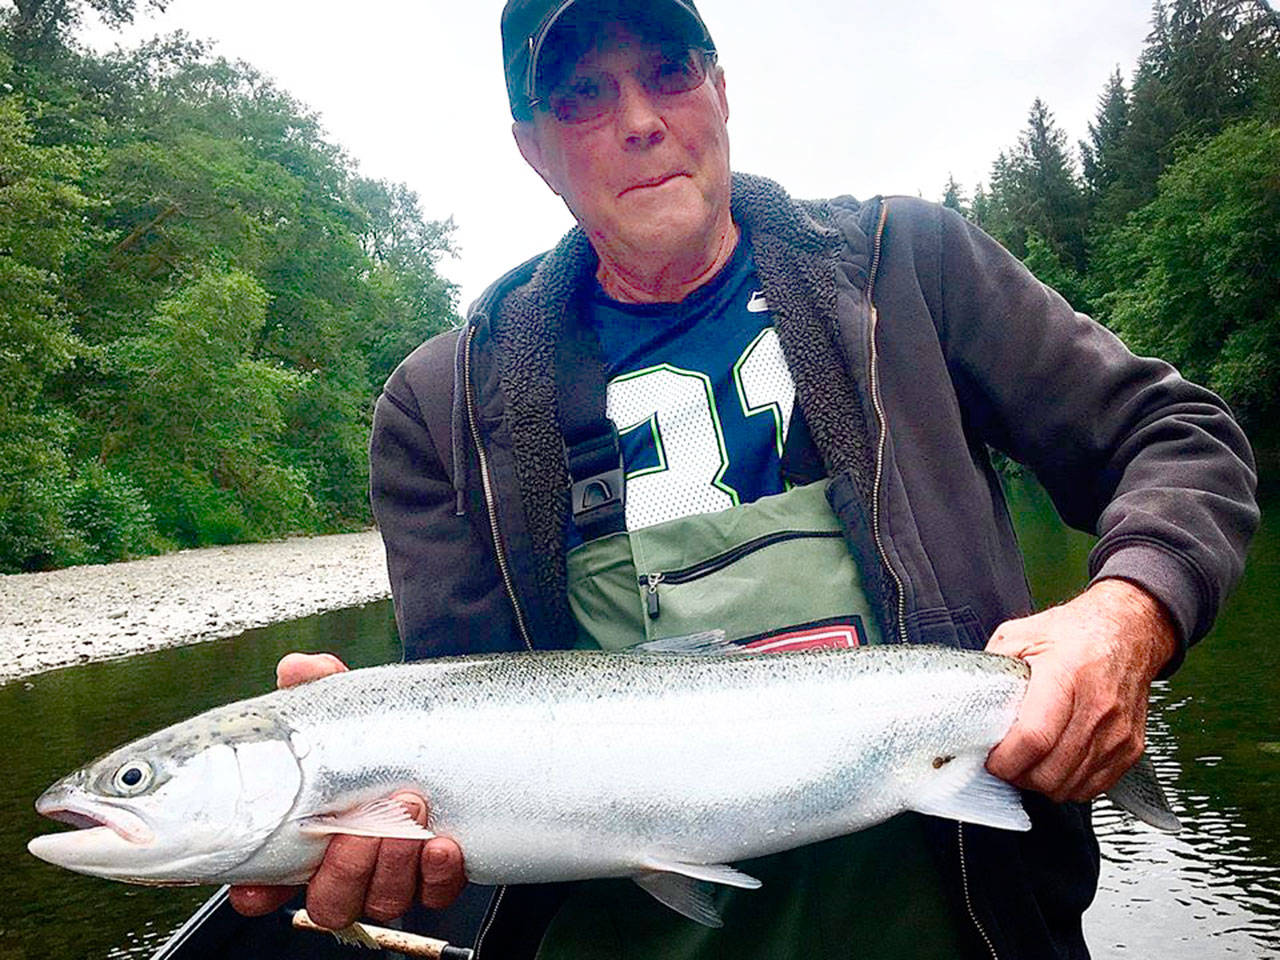 Randy Lundon of Joyce caught this chrome summer steelhead recently while fishing the Bogachiel River with Jerry Wright of Jerry’s Bait and Tackle. The fish was so fresh from the Pacific Ocean that the tails of sea lice (near anal fin) were still attached to this fish. (Jerry’s Bait and Tackle)